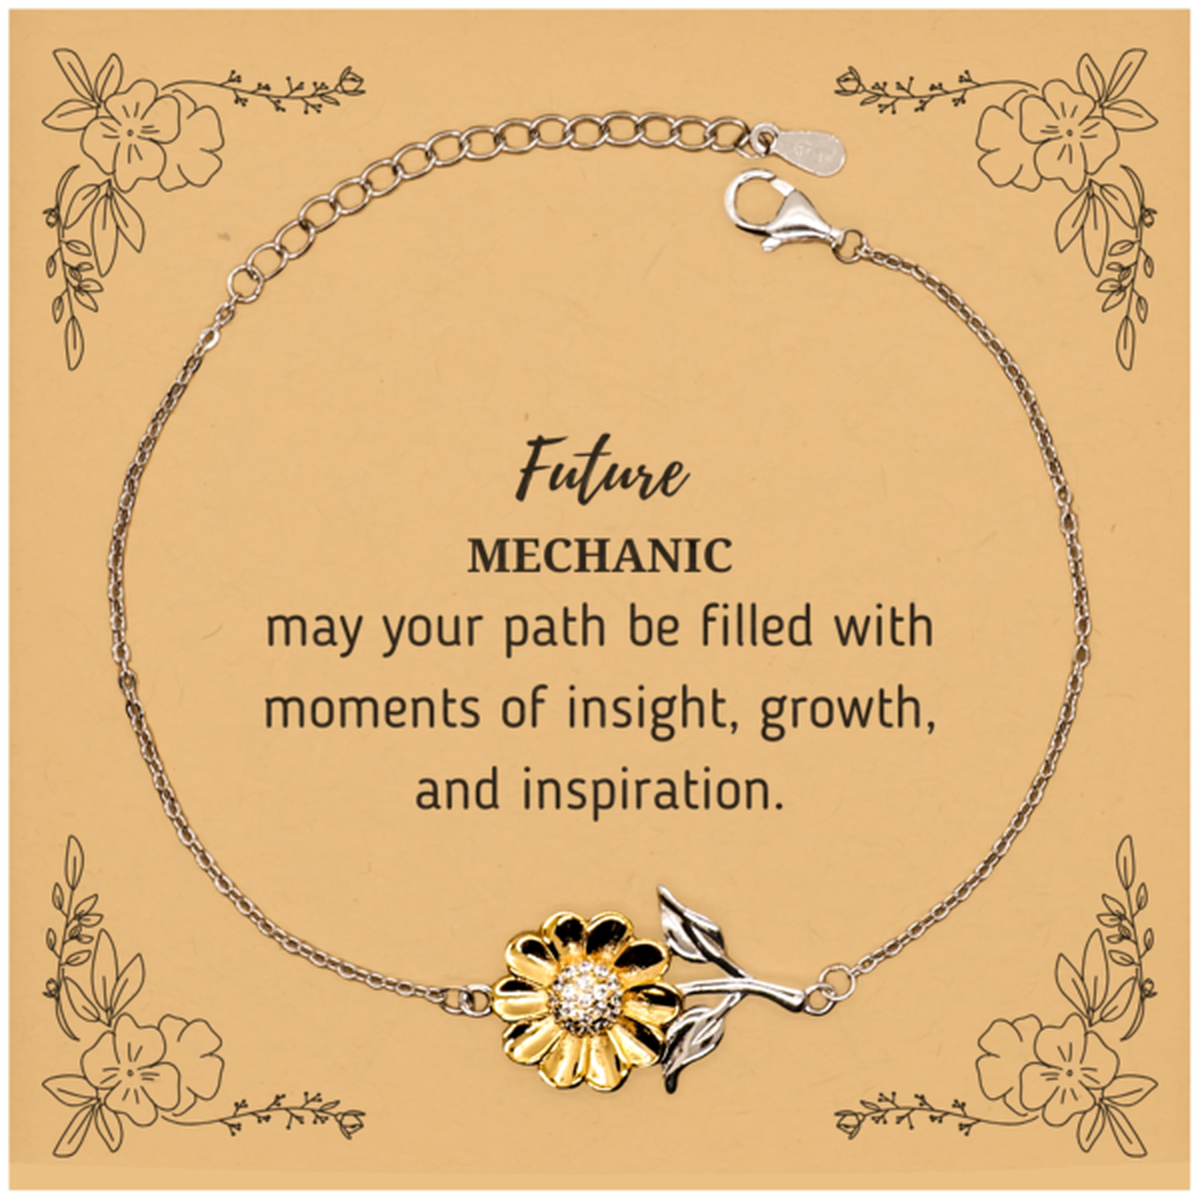 Future Mechanic Gifts, May your path be filled with moments of insight, Graduation Gifts for New Mechanic, Christmas Unique Sunflower Bracelet For Men, Women, Friends